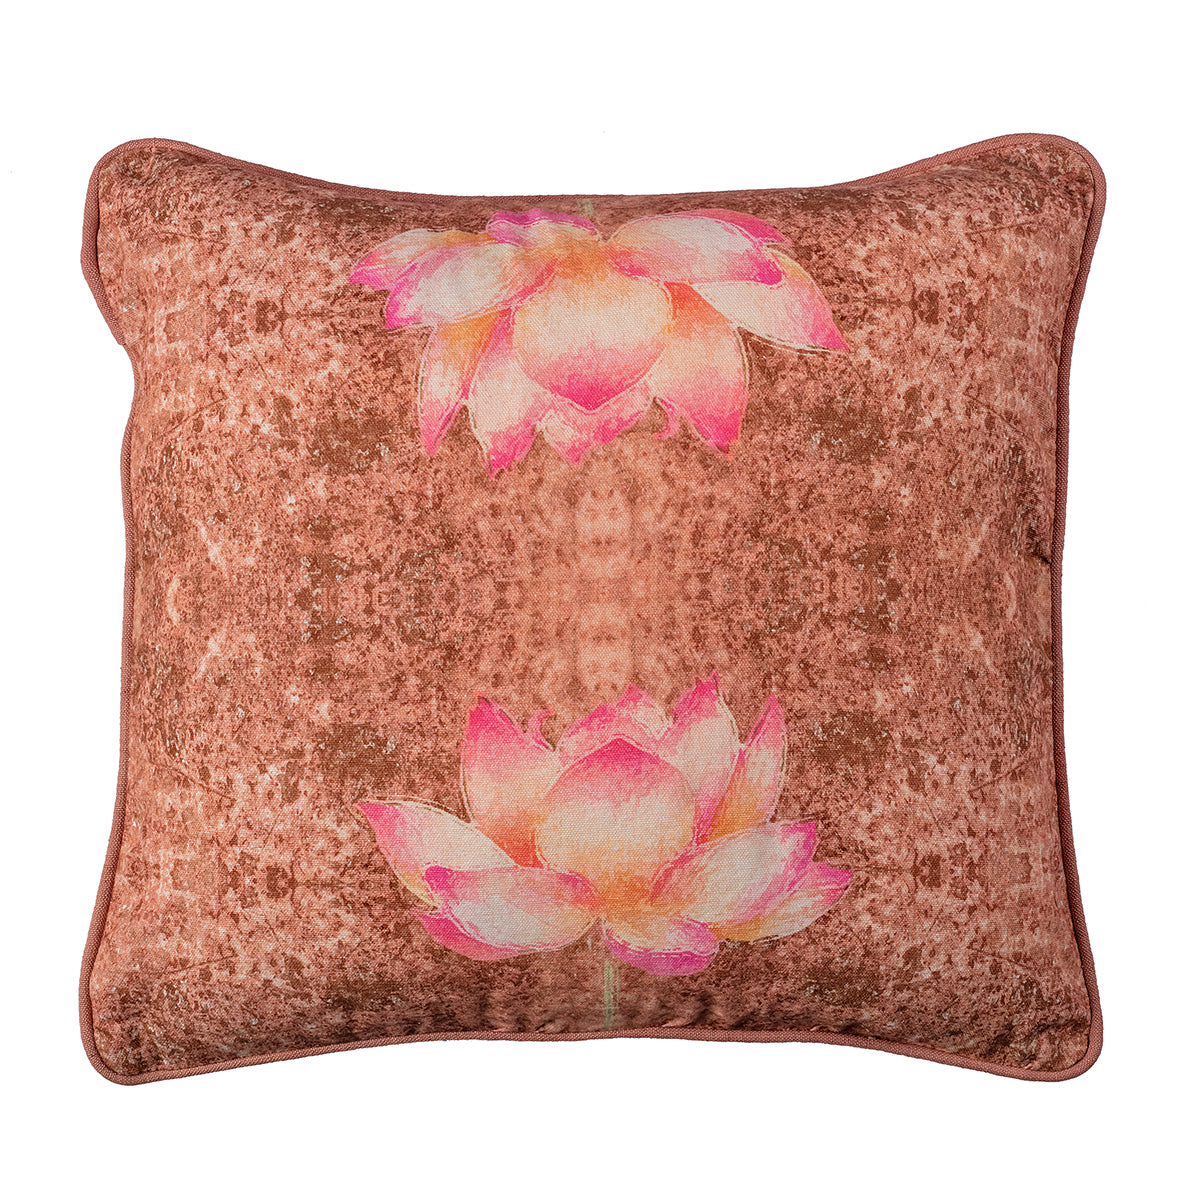 Vintage Floral Pink Cushion Cover